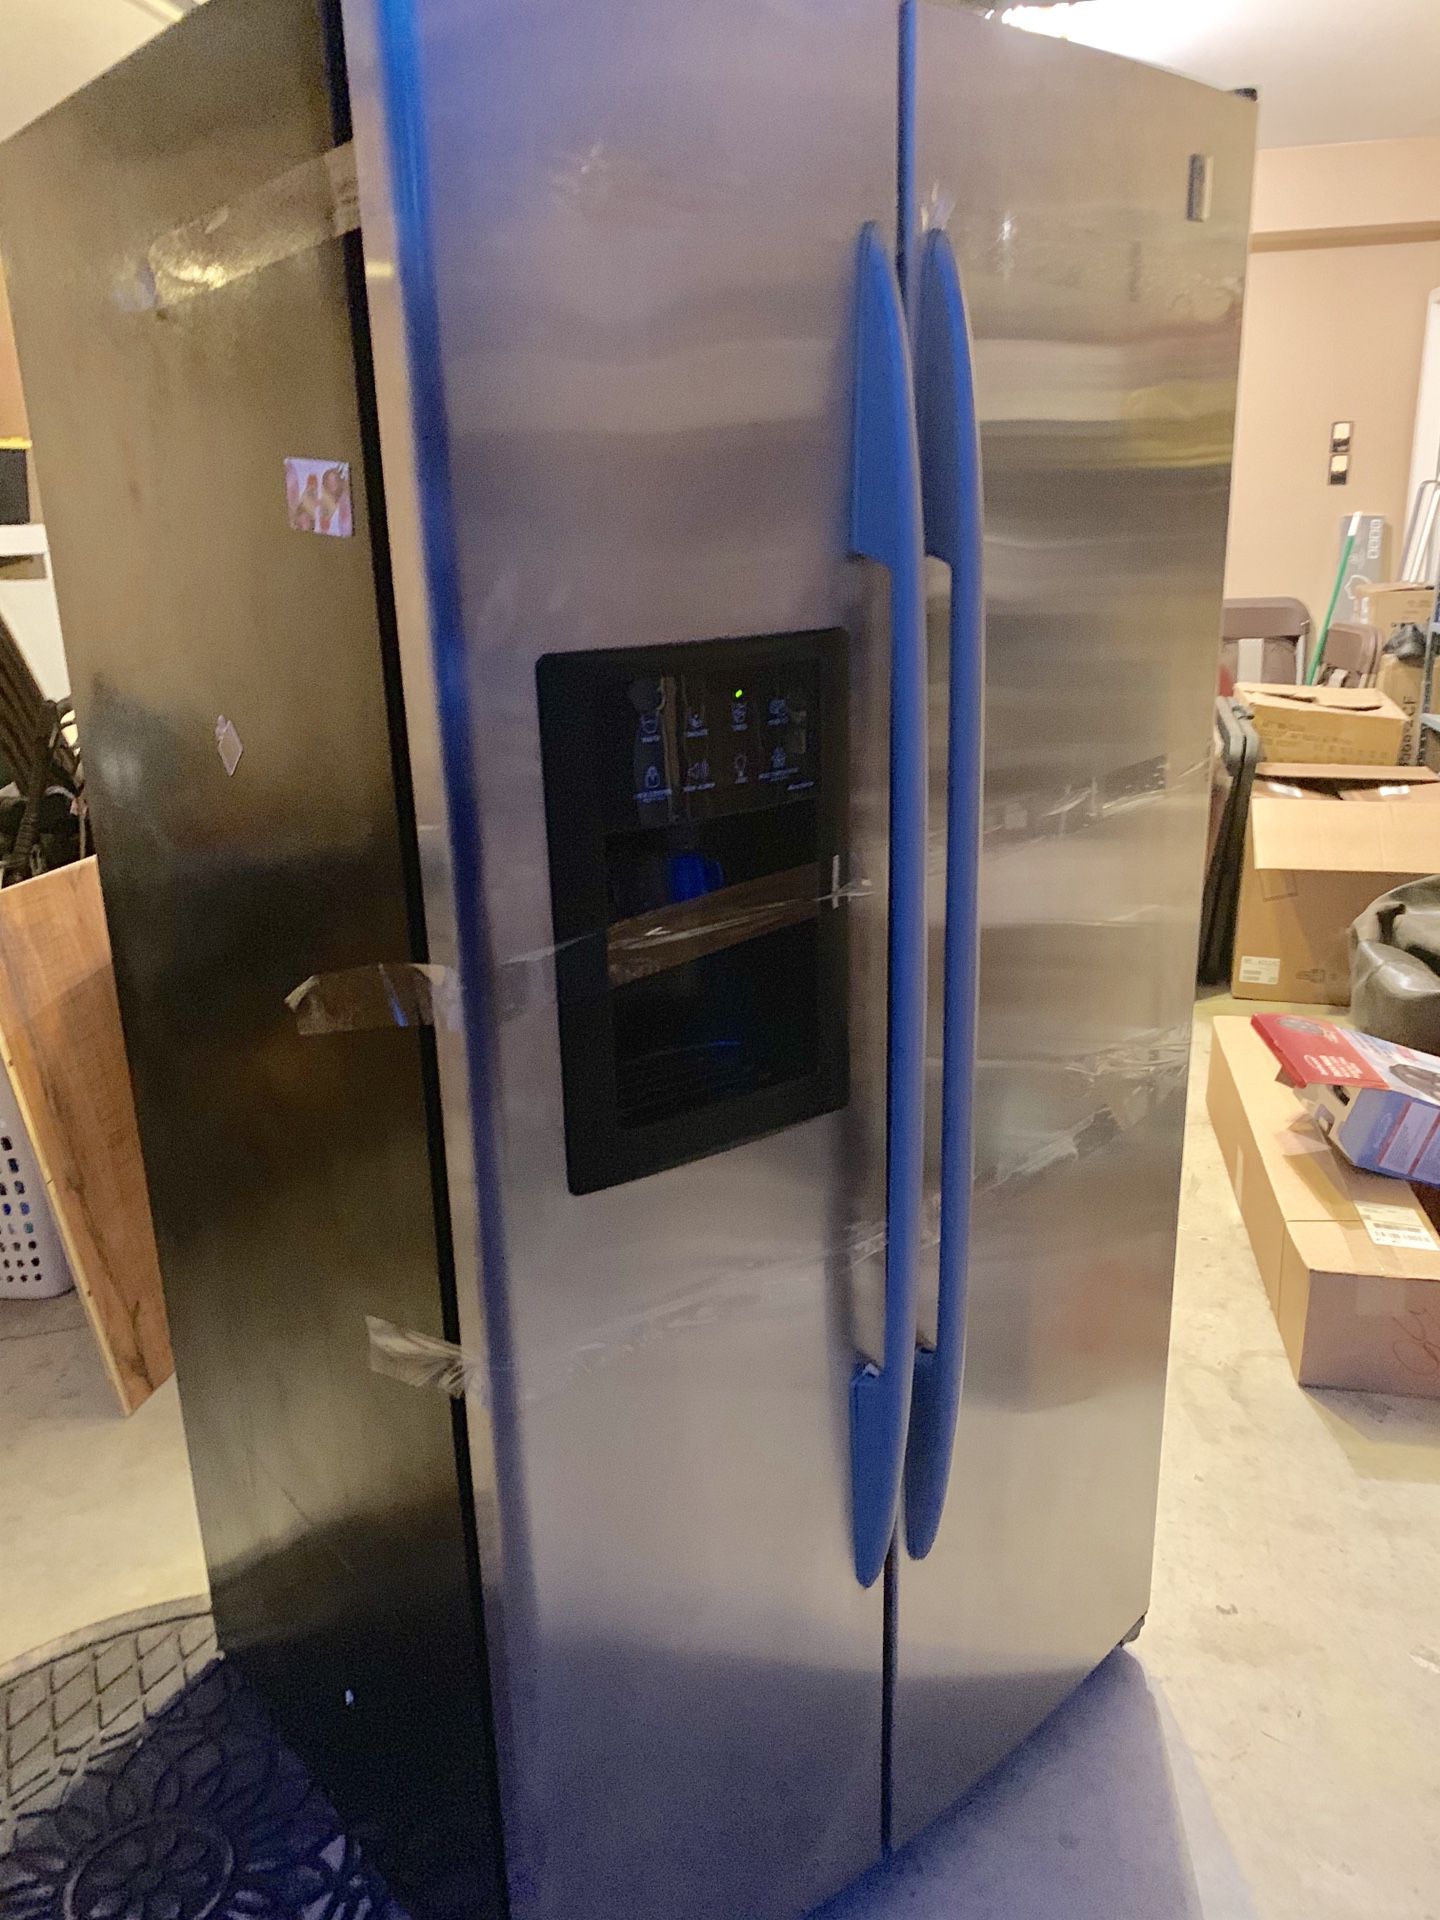 General Electric stainless steel side-by-side refrigerator.